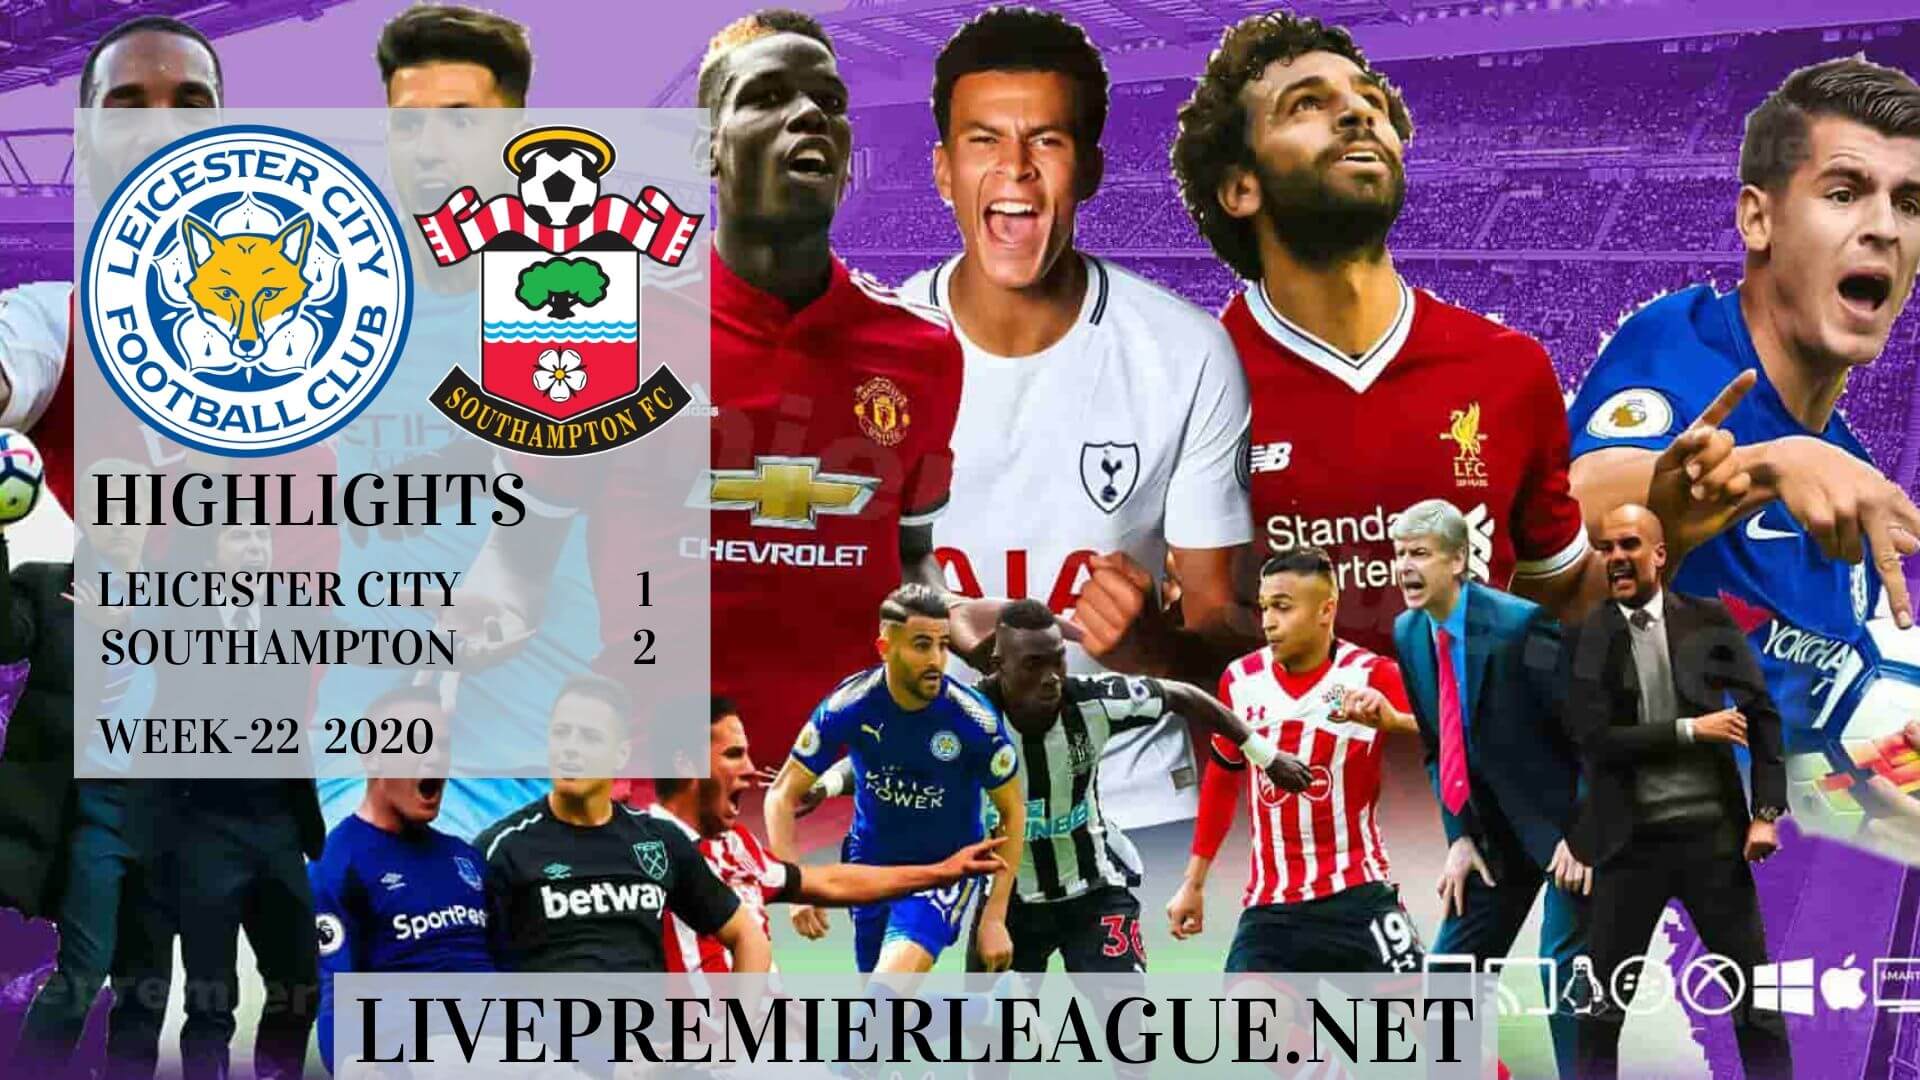 Leicester City Vs Southampton Highlights 2020 Week 22